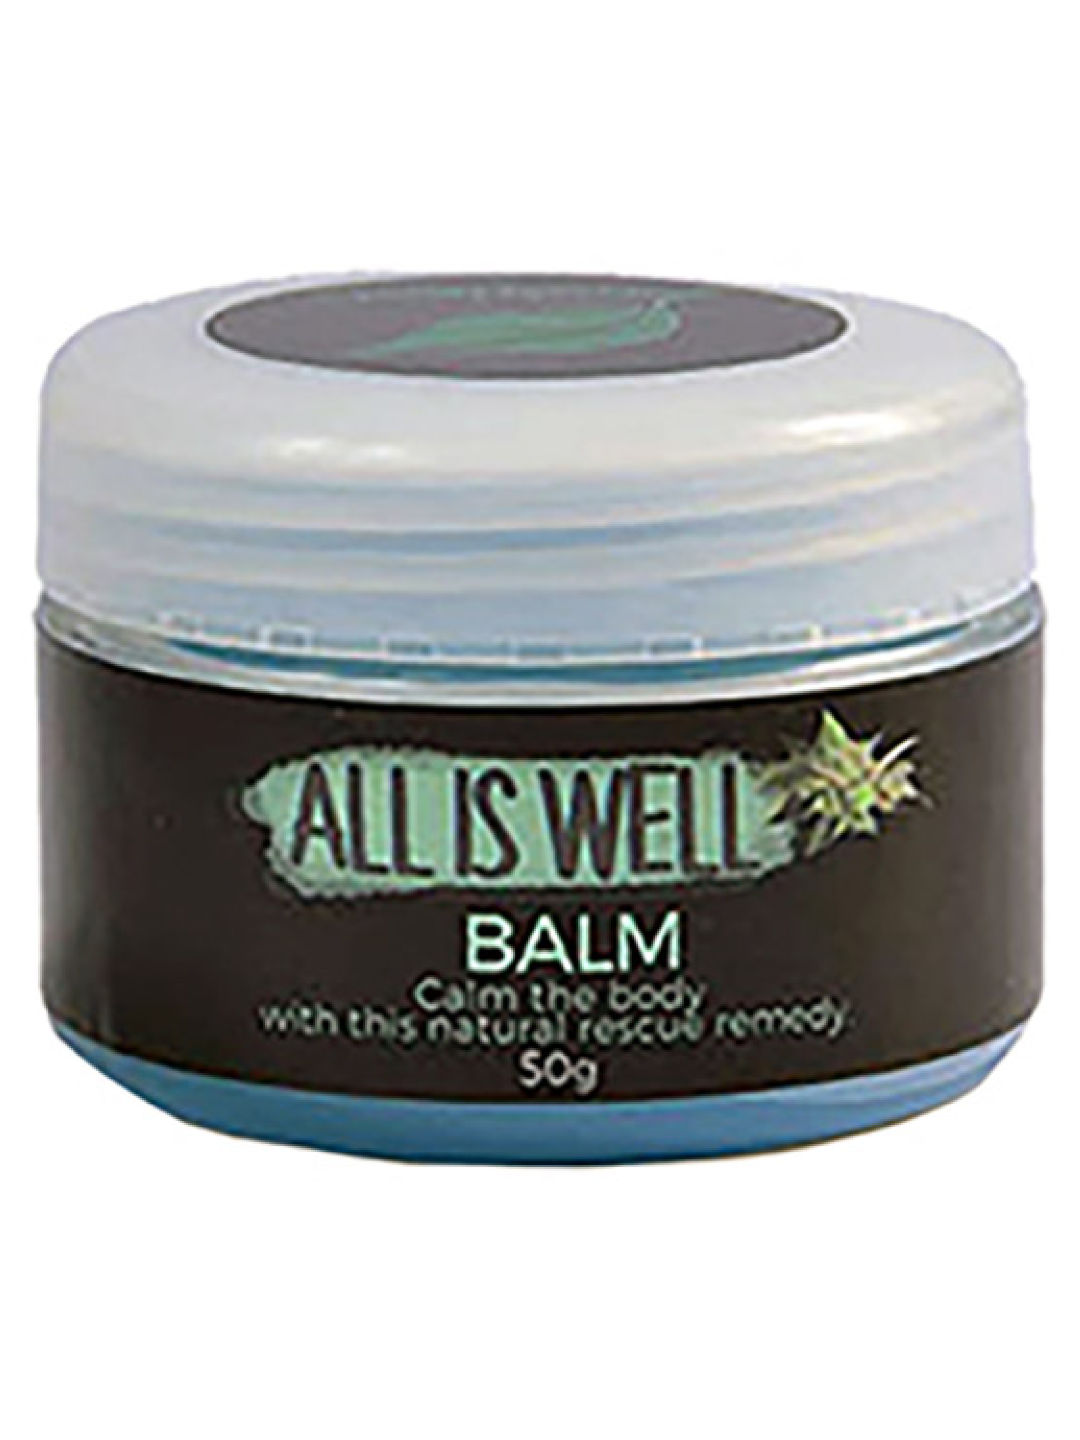 Zenutrients All is Well Balm (50g)